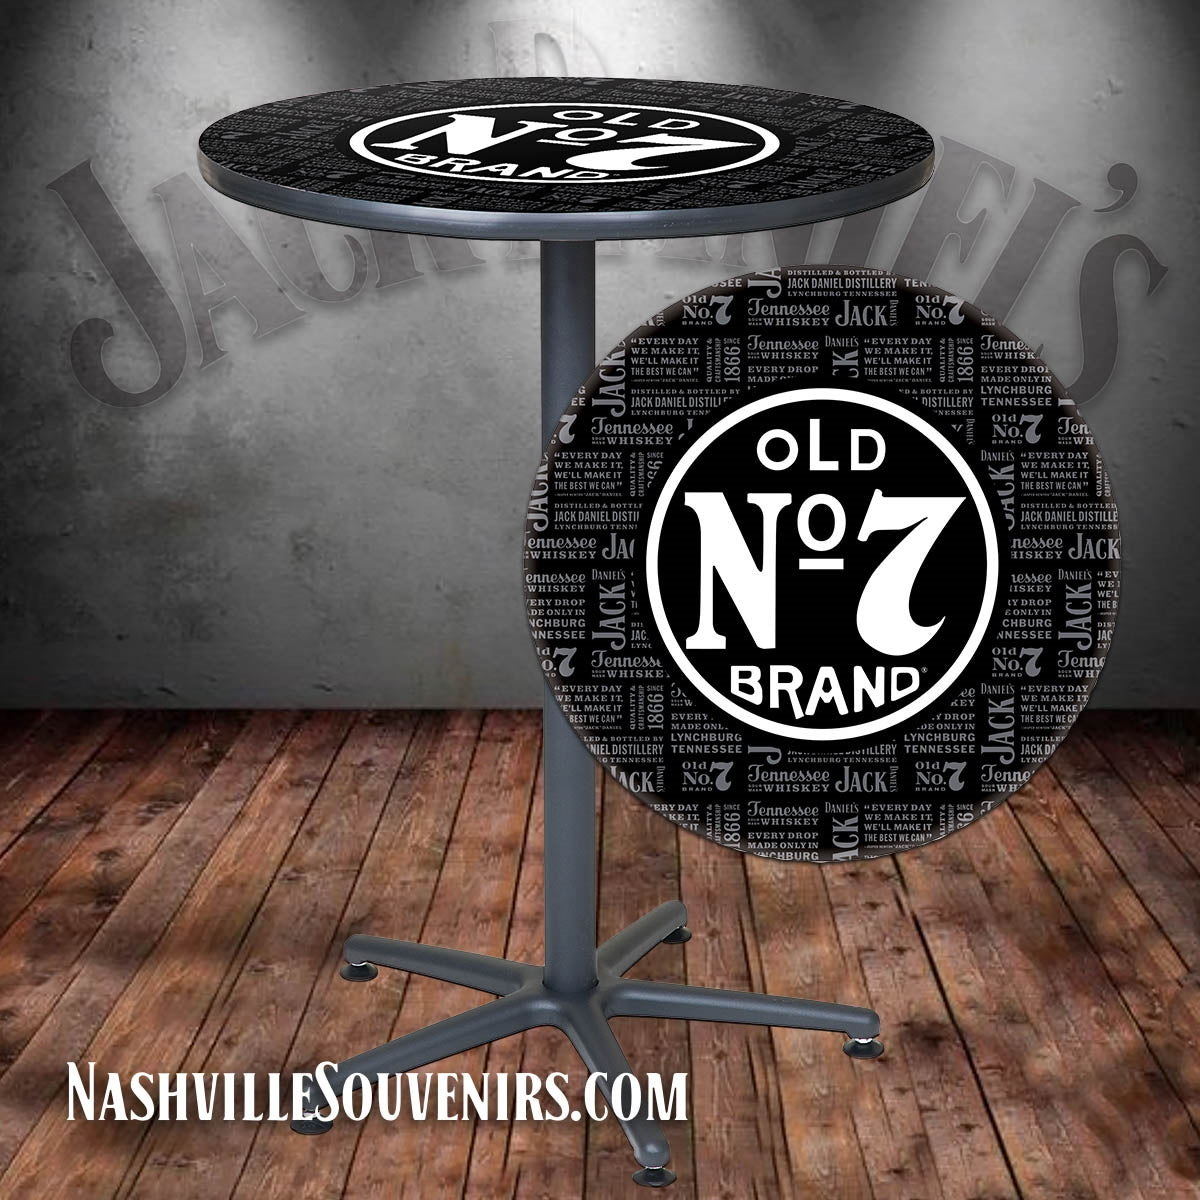 Entertain friends in Jack Daniel's style with this attractive Jack Daniel's cafe table. This is also a very sturdy piece of furniture for your home bar or recreation room.